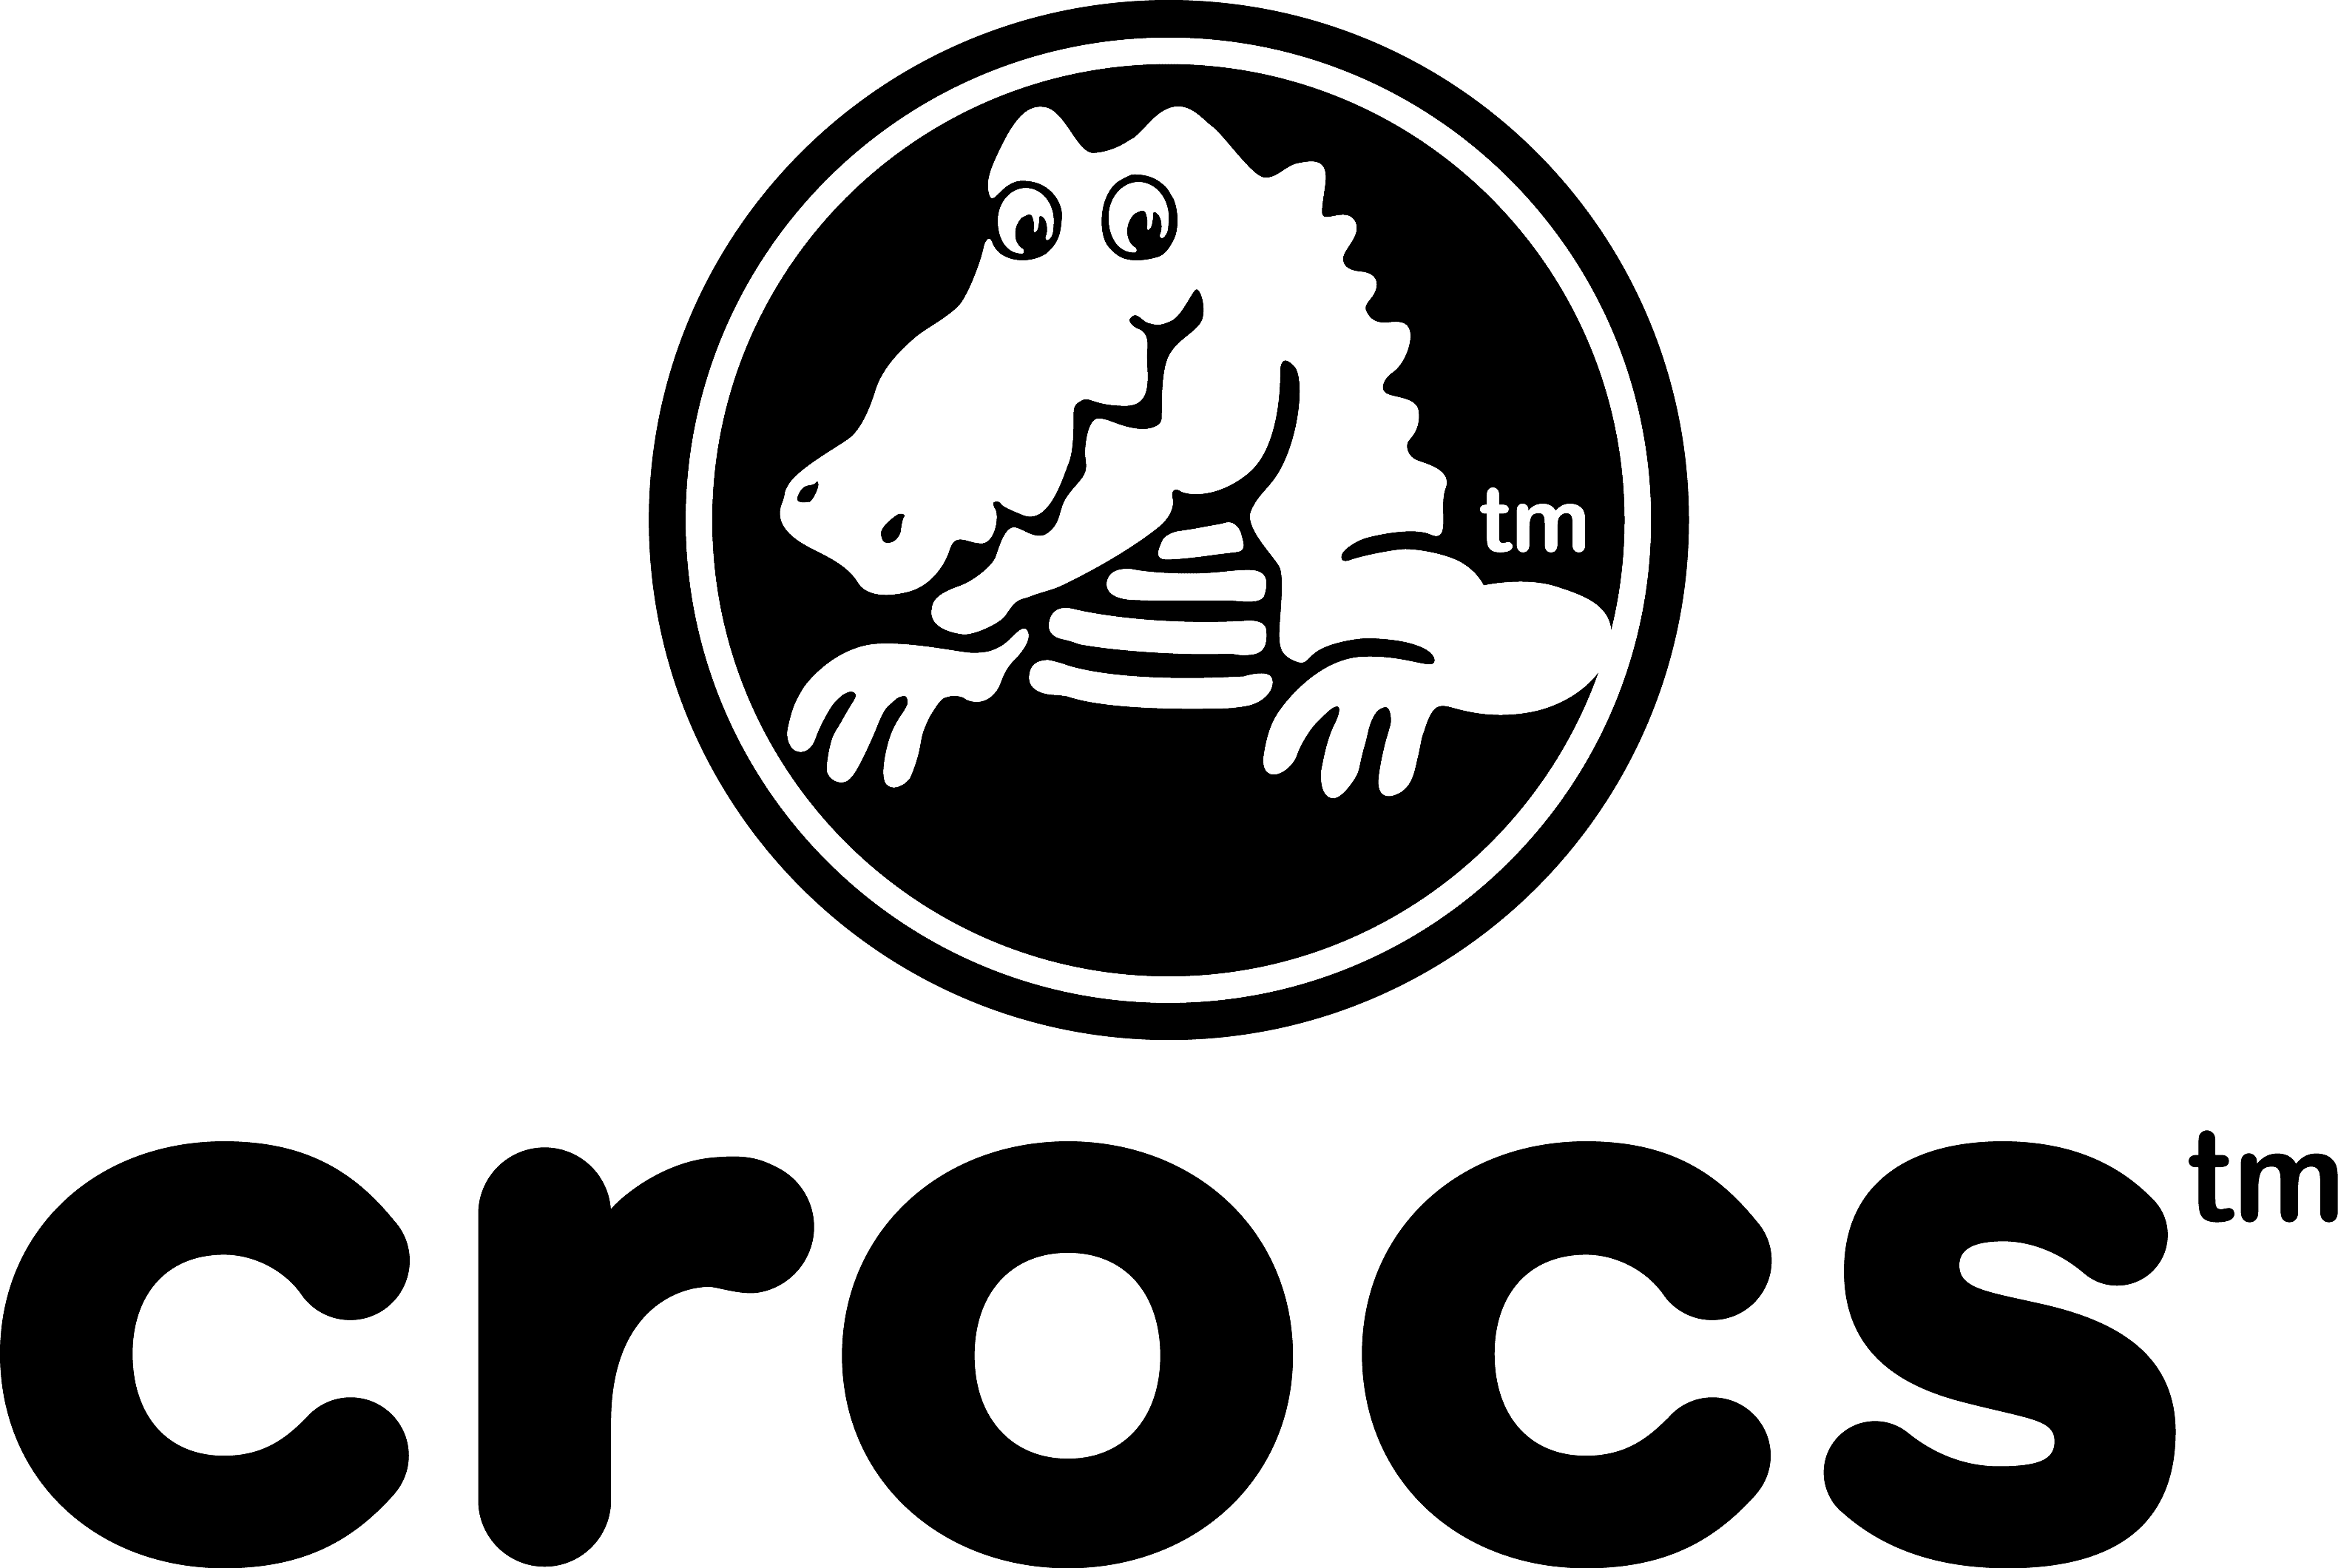 Crocs logo and symbol, meaning, history, PNG